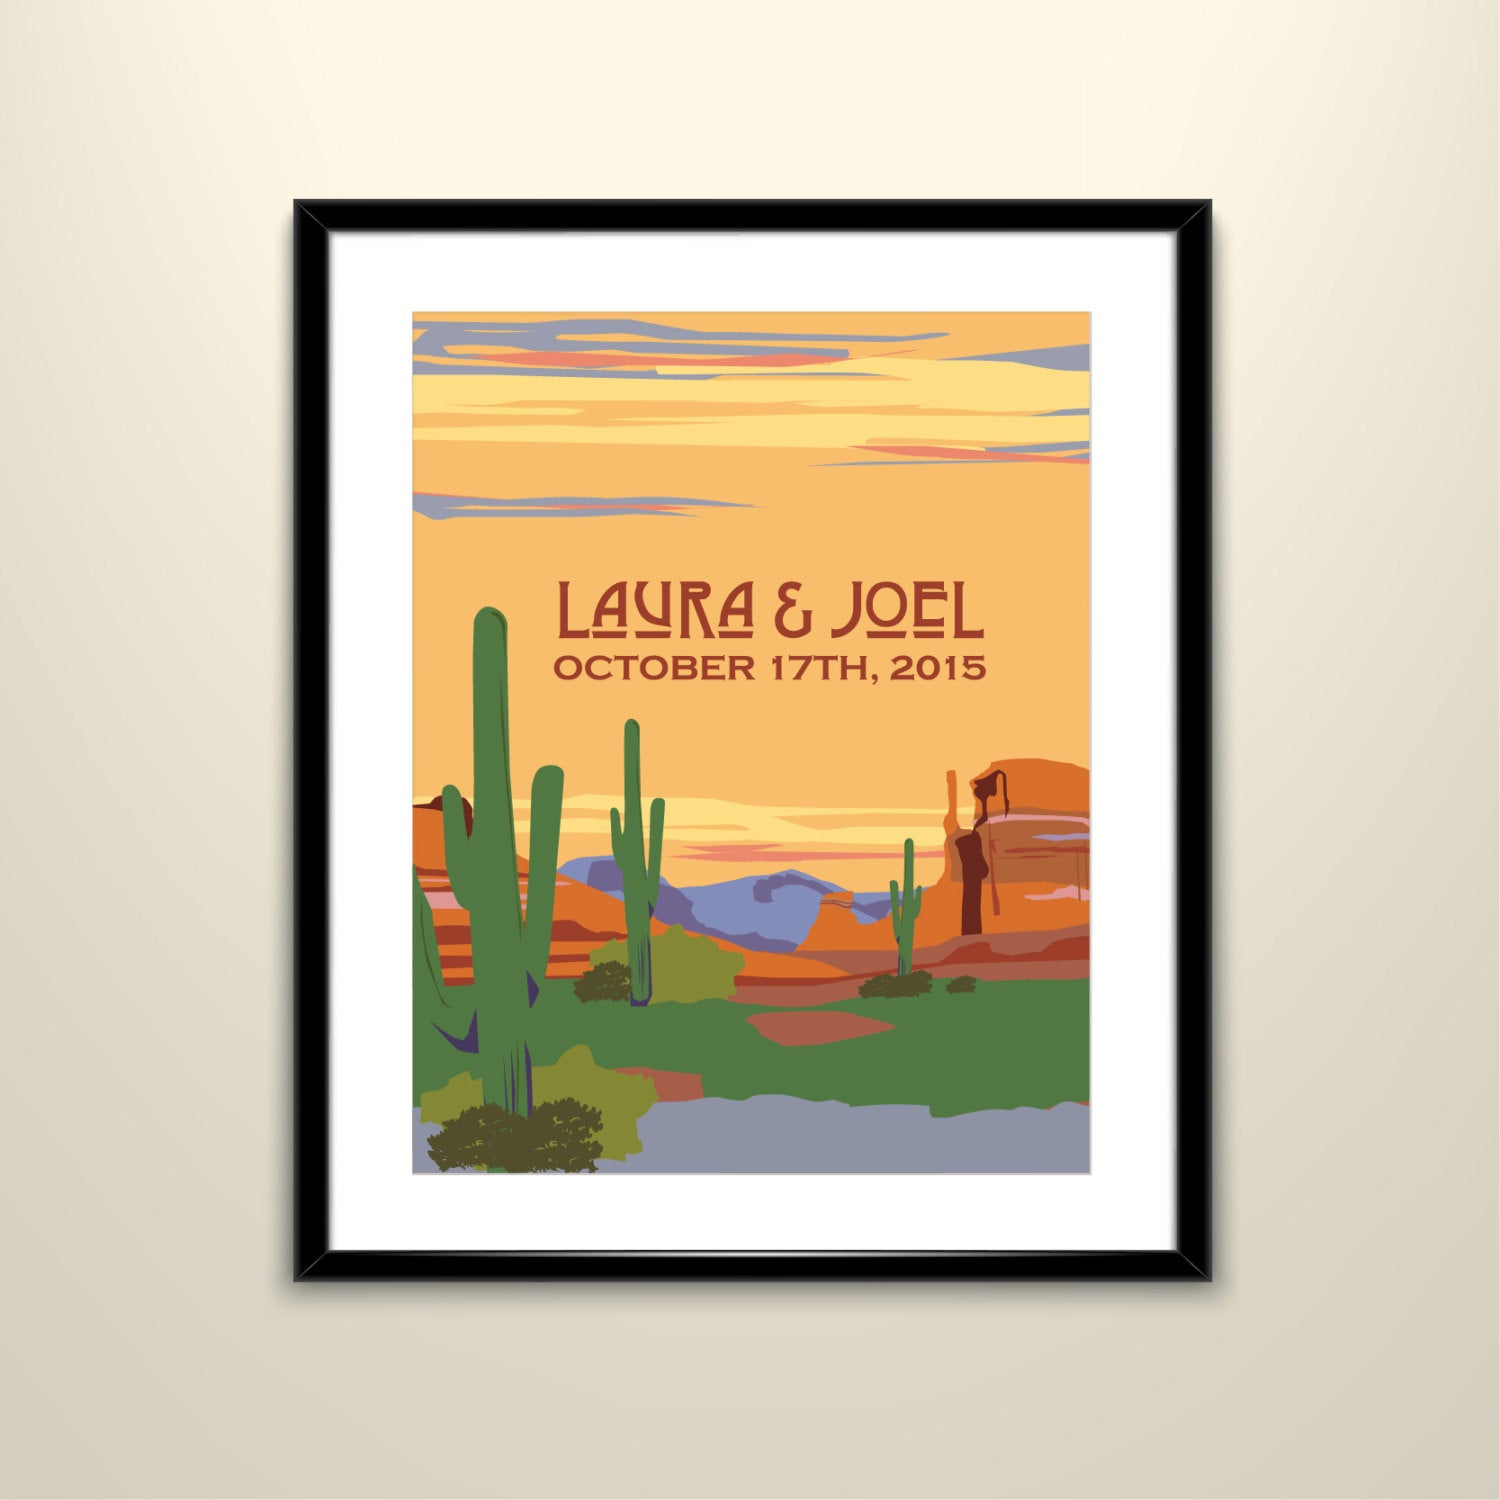 Vintage Arizona Desert Travel Poster - 11x14 Paper Poster - Wedding Poster personalized with Names and date (frame not included)